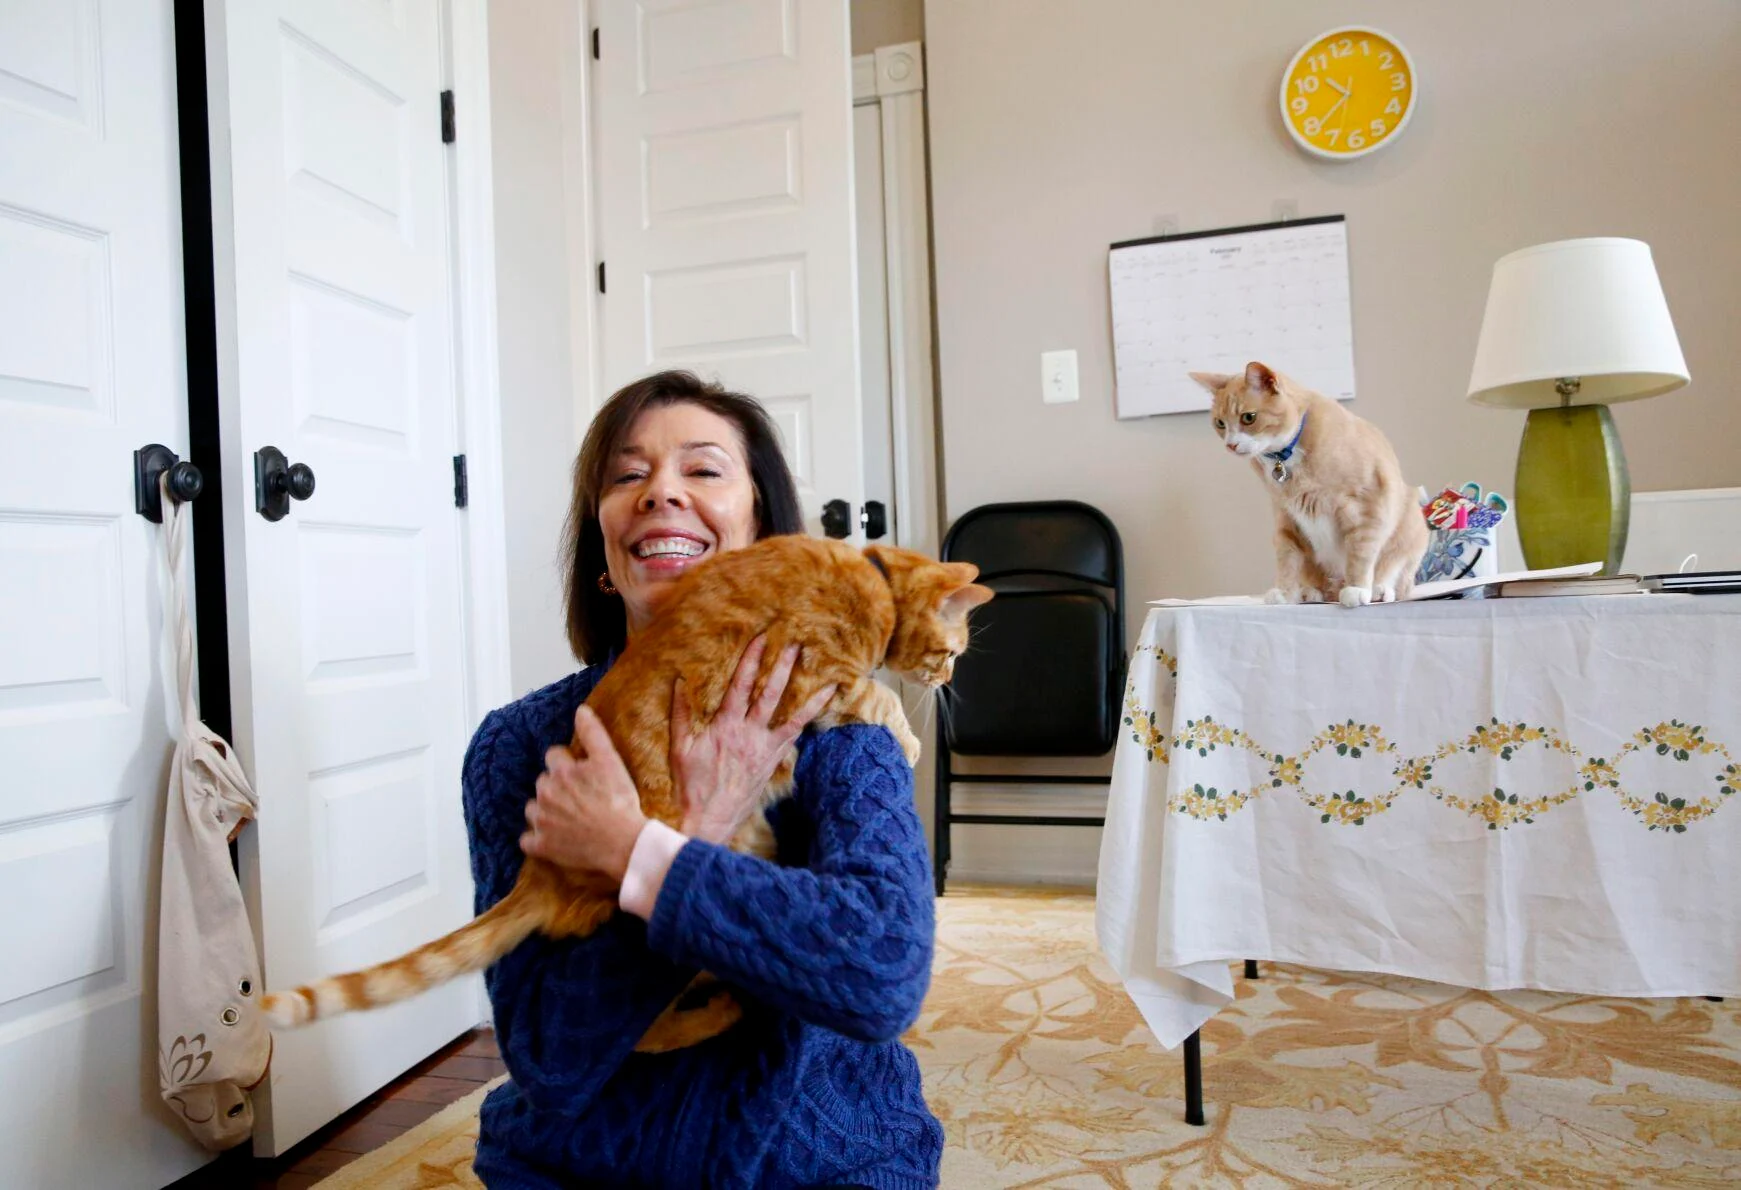 Susan Micari is shown with her cats, Rubilee and Loki, at her home in Richmond on Monday. Last fall, as a volunteer and via Zoom, Micari taught English, primarily to Afghan girls living in a safe house in Kabul.